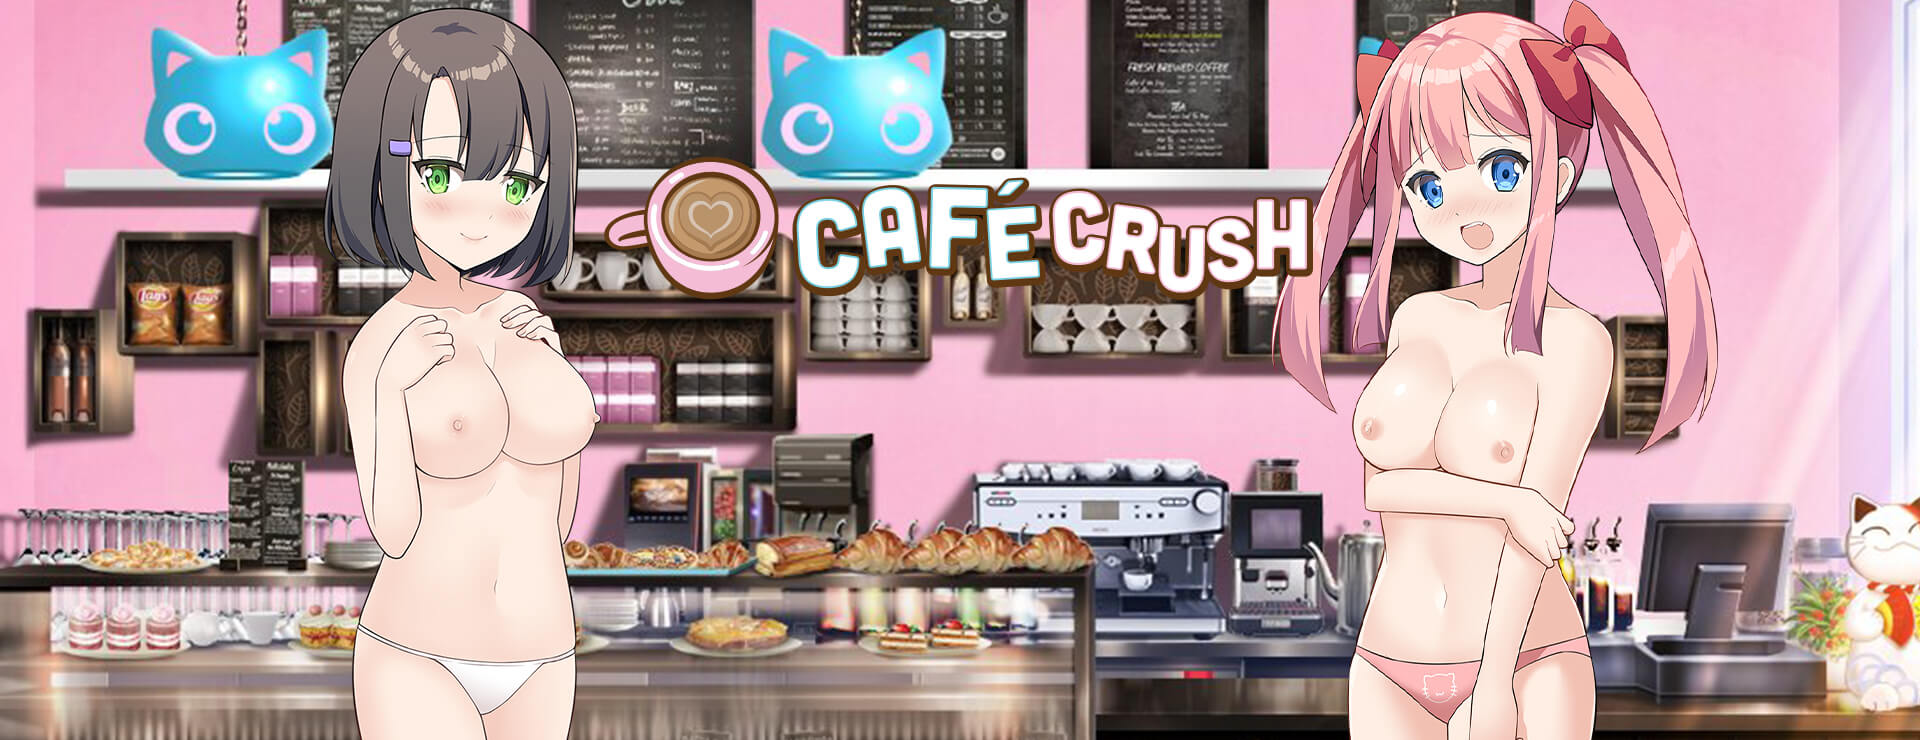 Cafe Crush (with Oppai Mode) - Zwanglos  Spiel